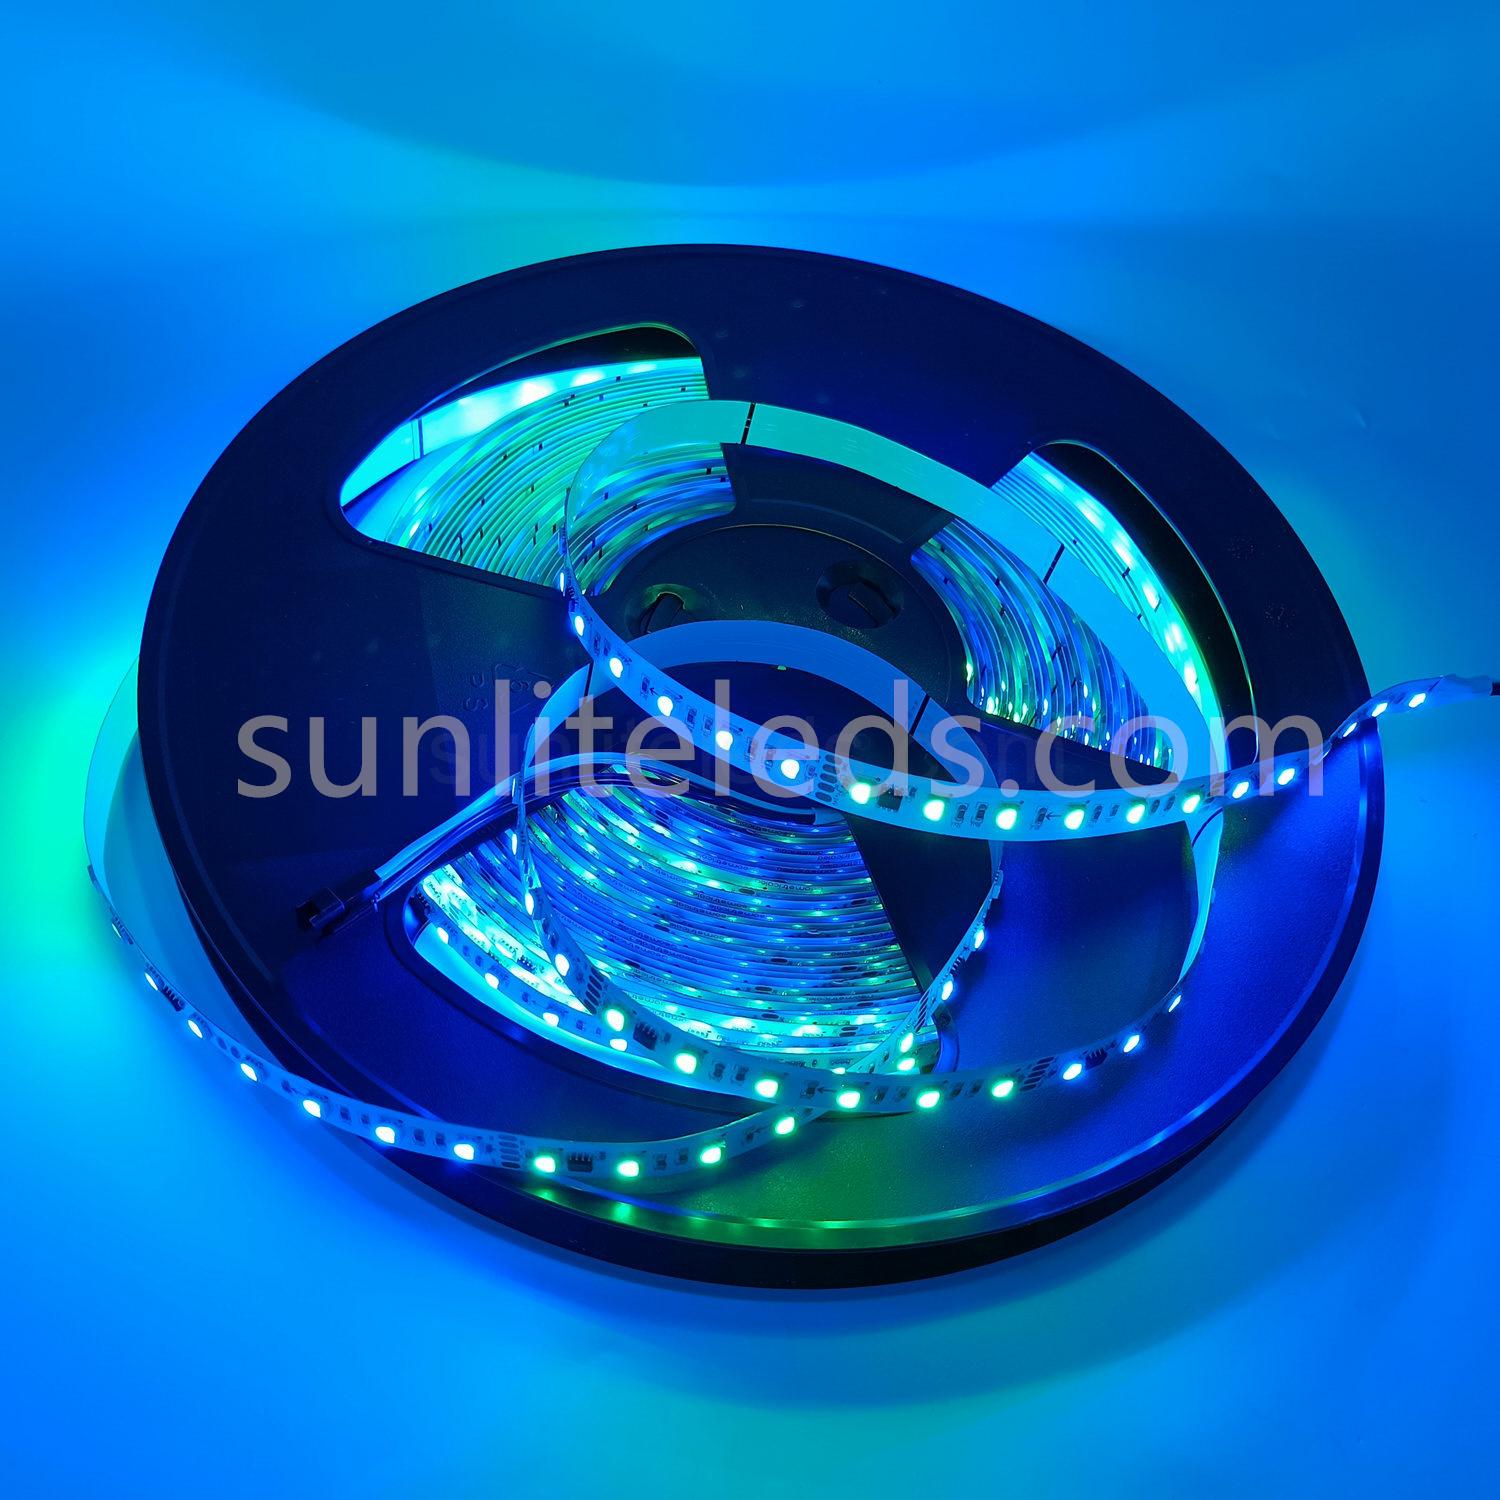 UCS2904 RGBW LED Strip Gallery Enhancing Your Environment